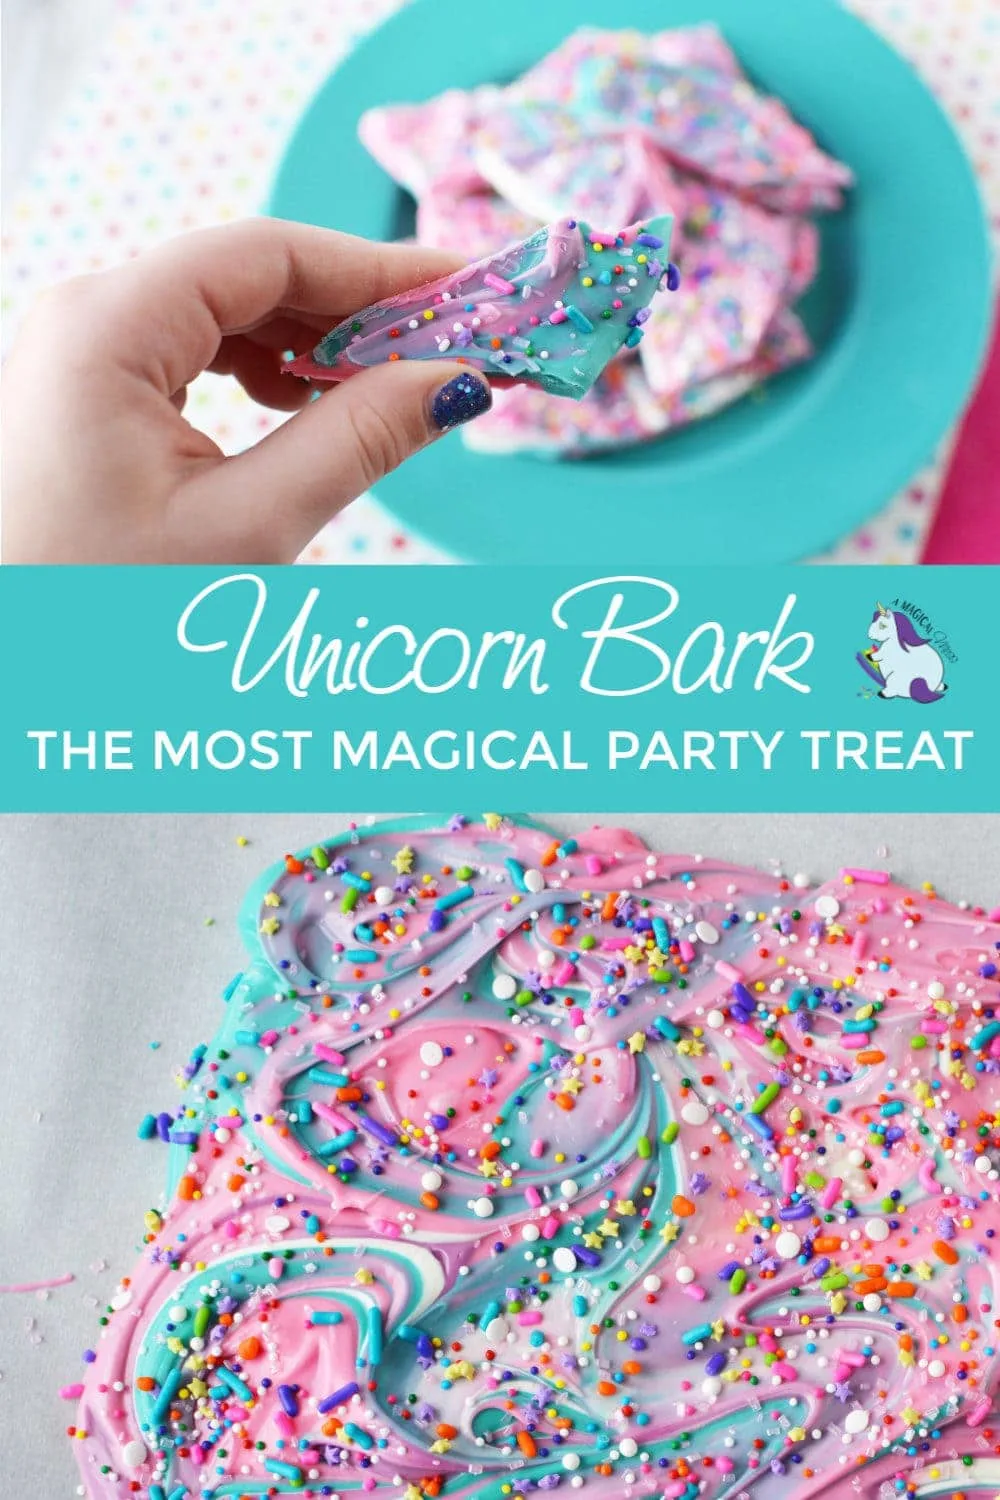 unicorn bark - the most magical party treat